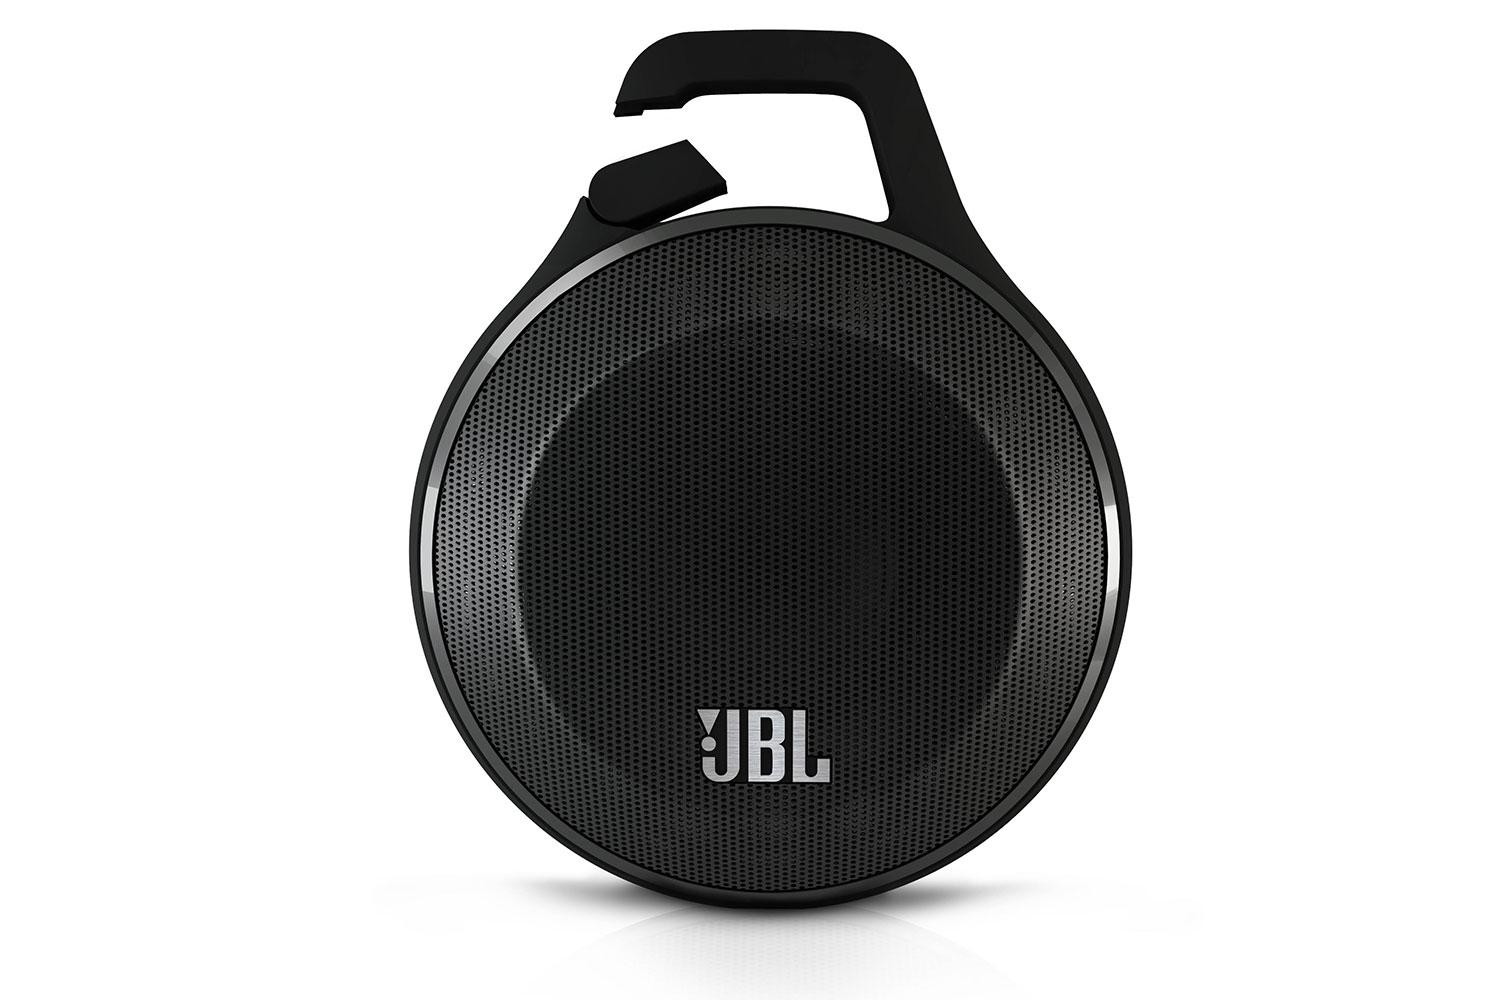 jbl clip portable speaker may best use carabiner outside rock climbing yet front view  press